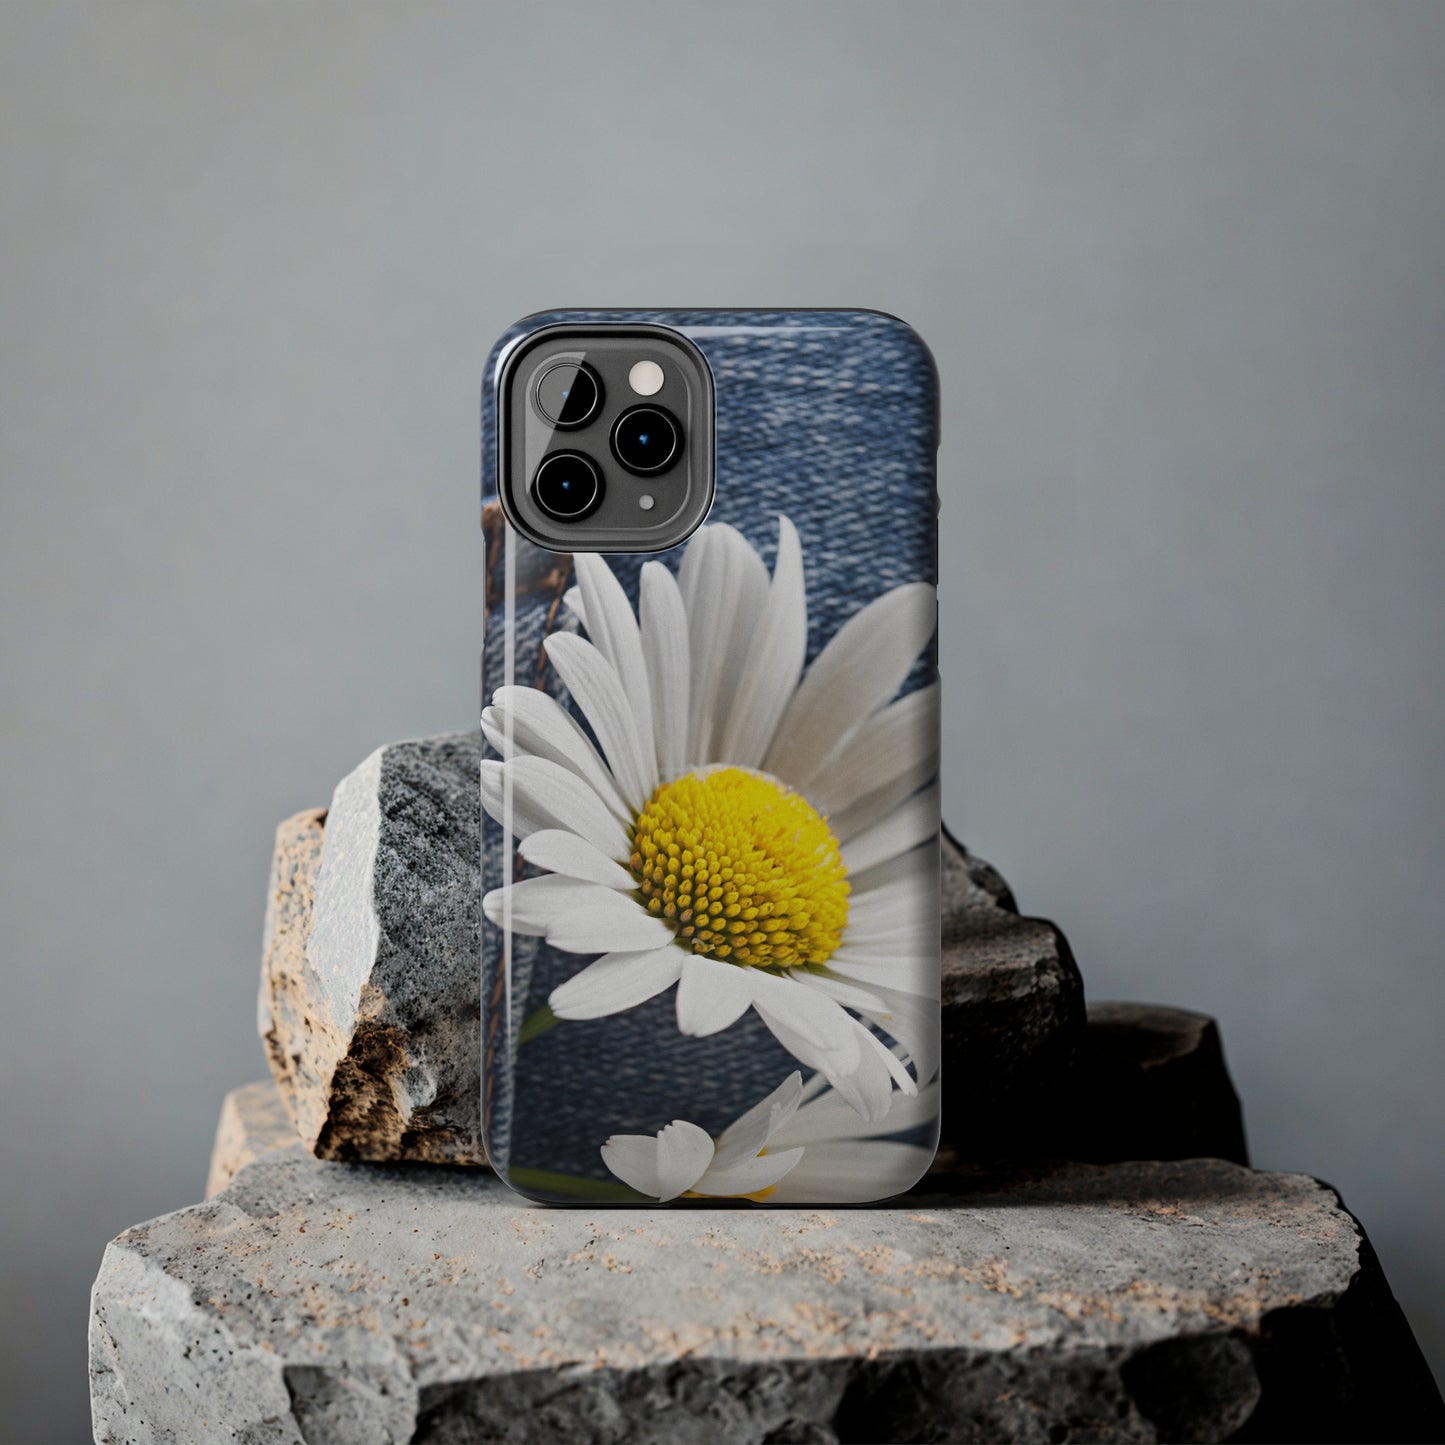 Denim & Daisy Only / iPhone Case